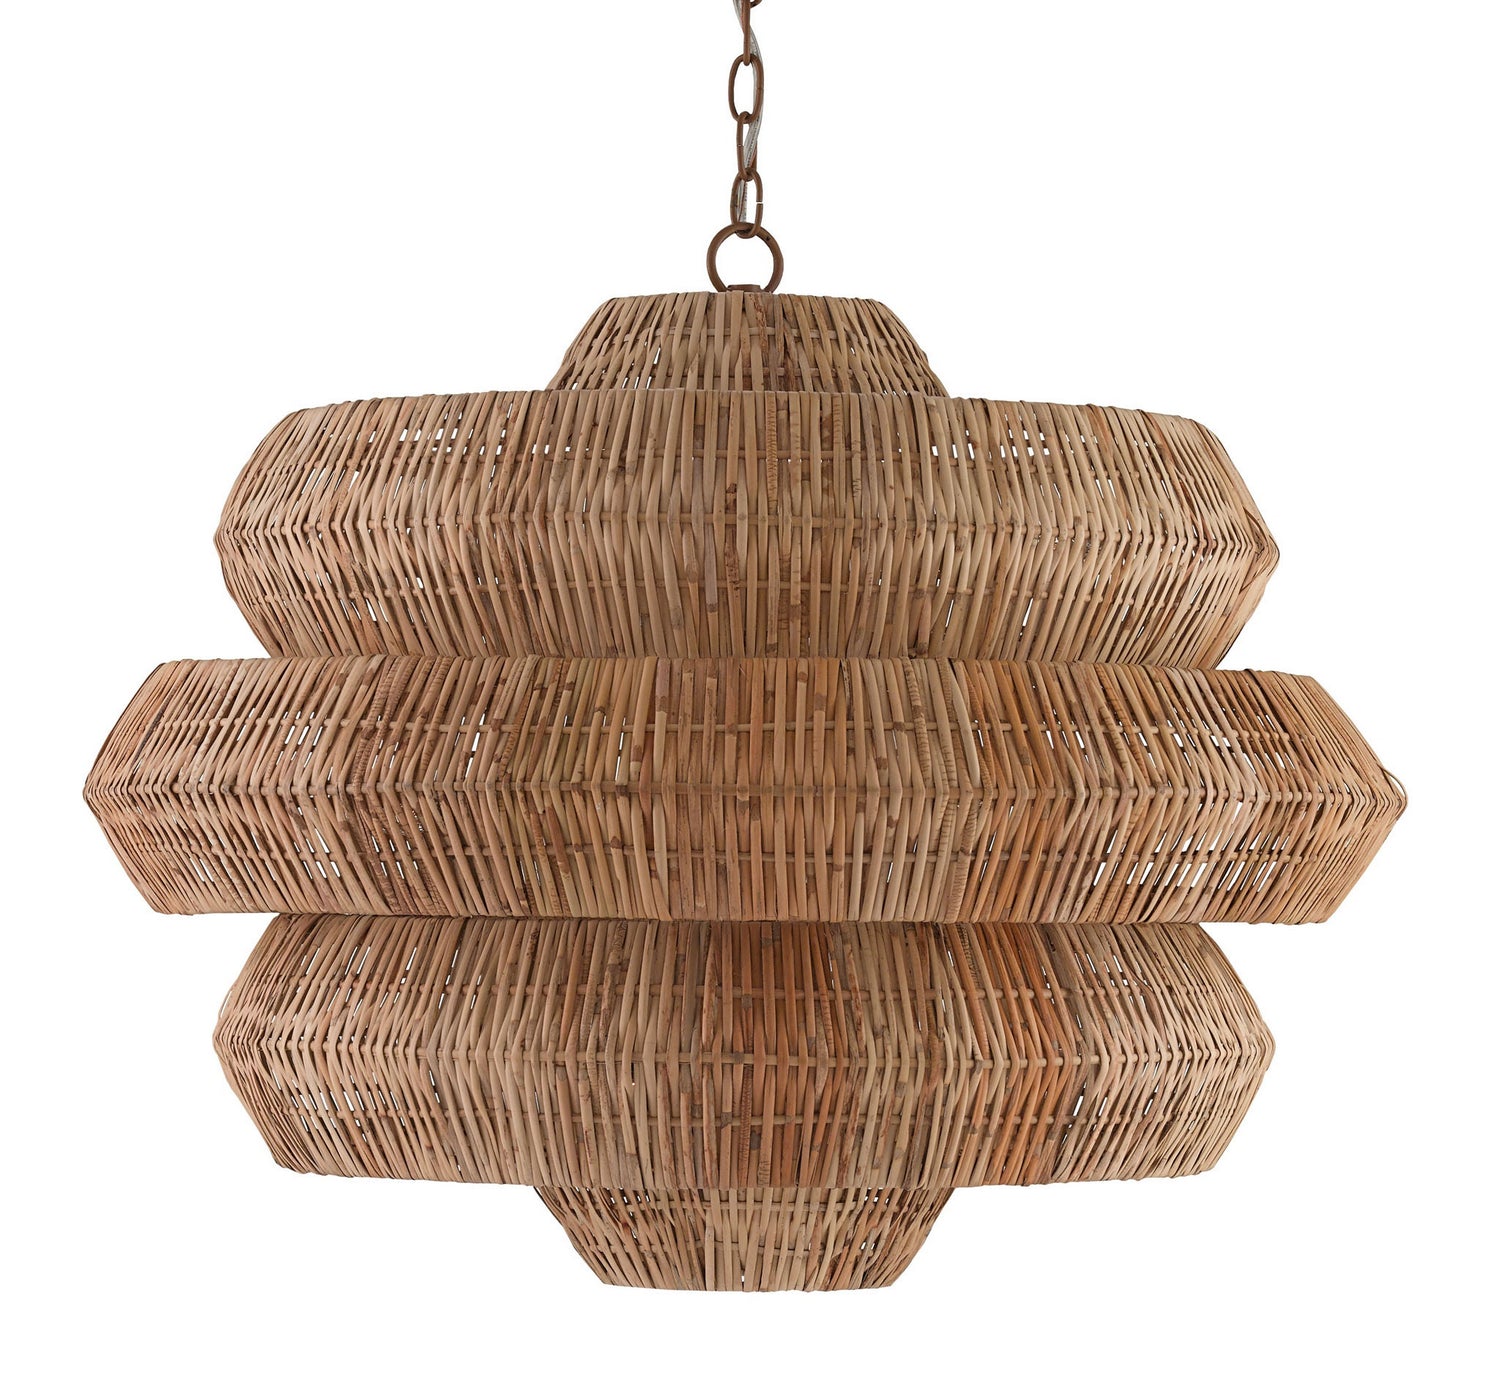 Nine Light Chandelier from the Antibes collection in Khaki/Natural finish